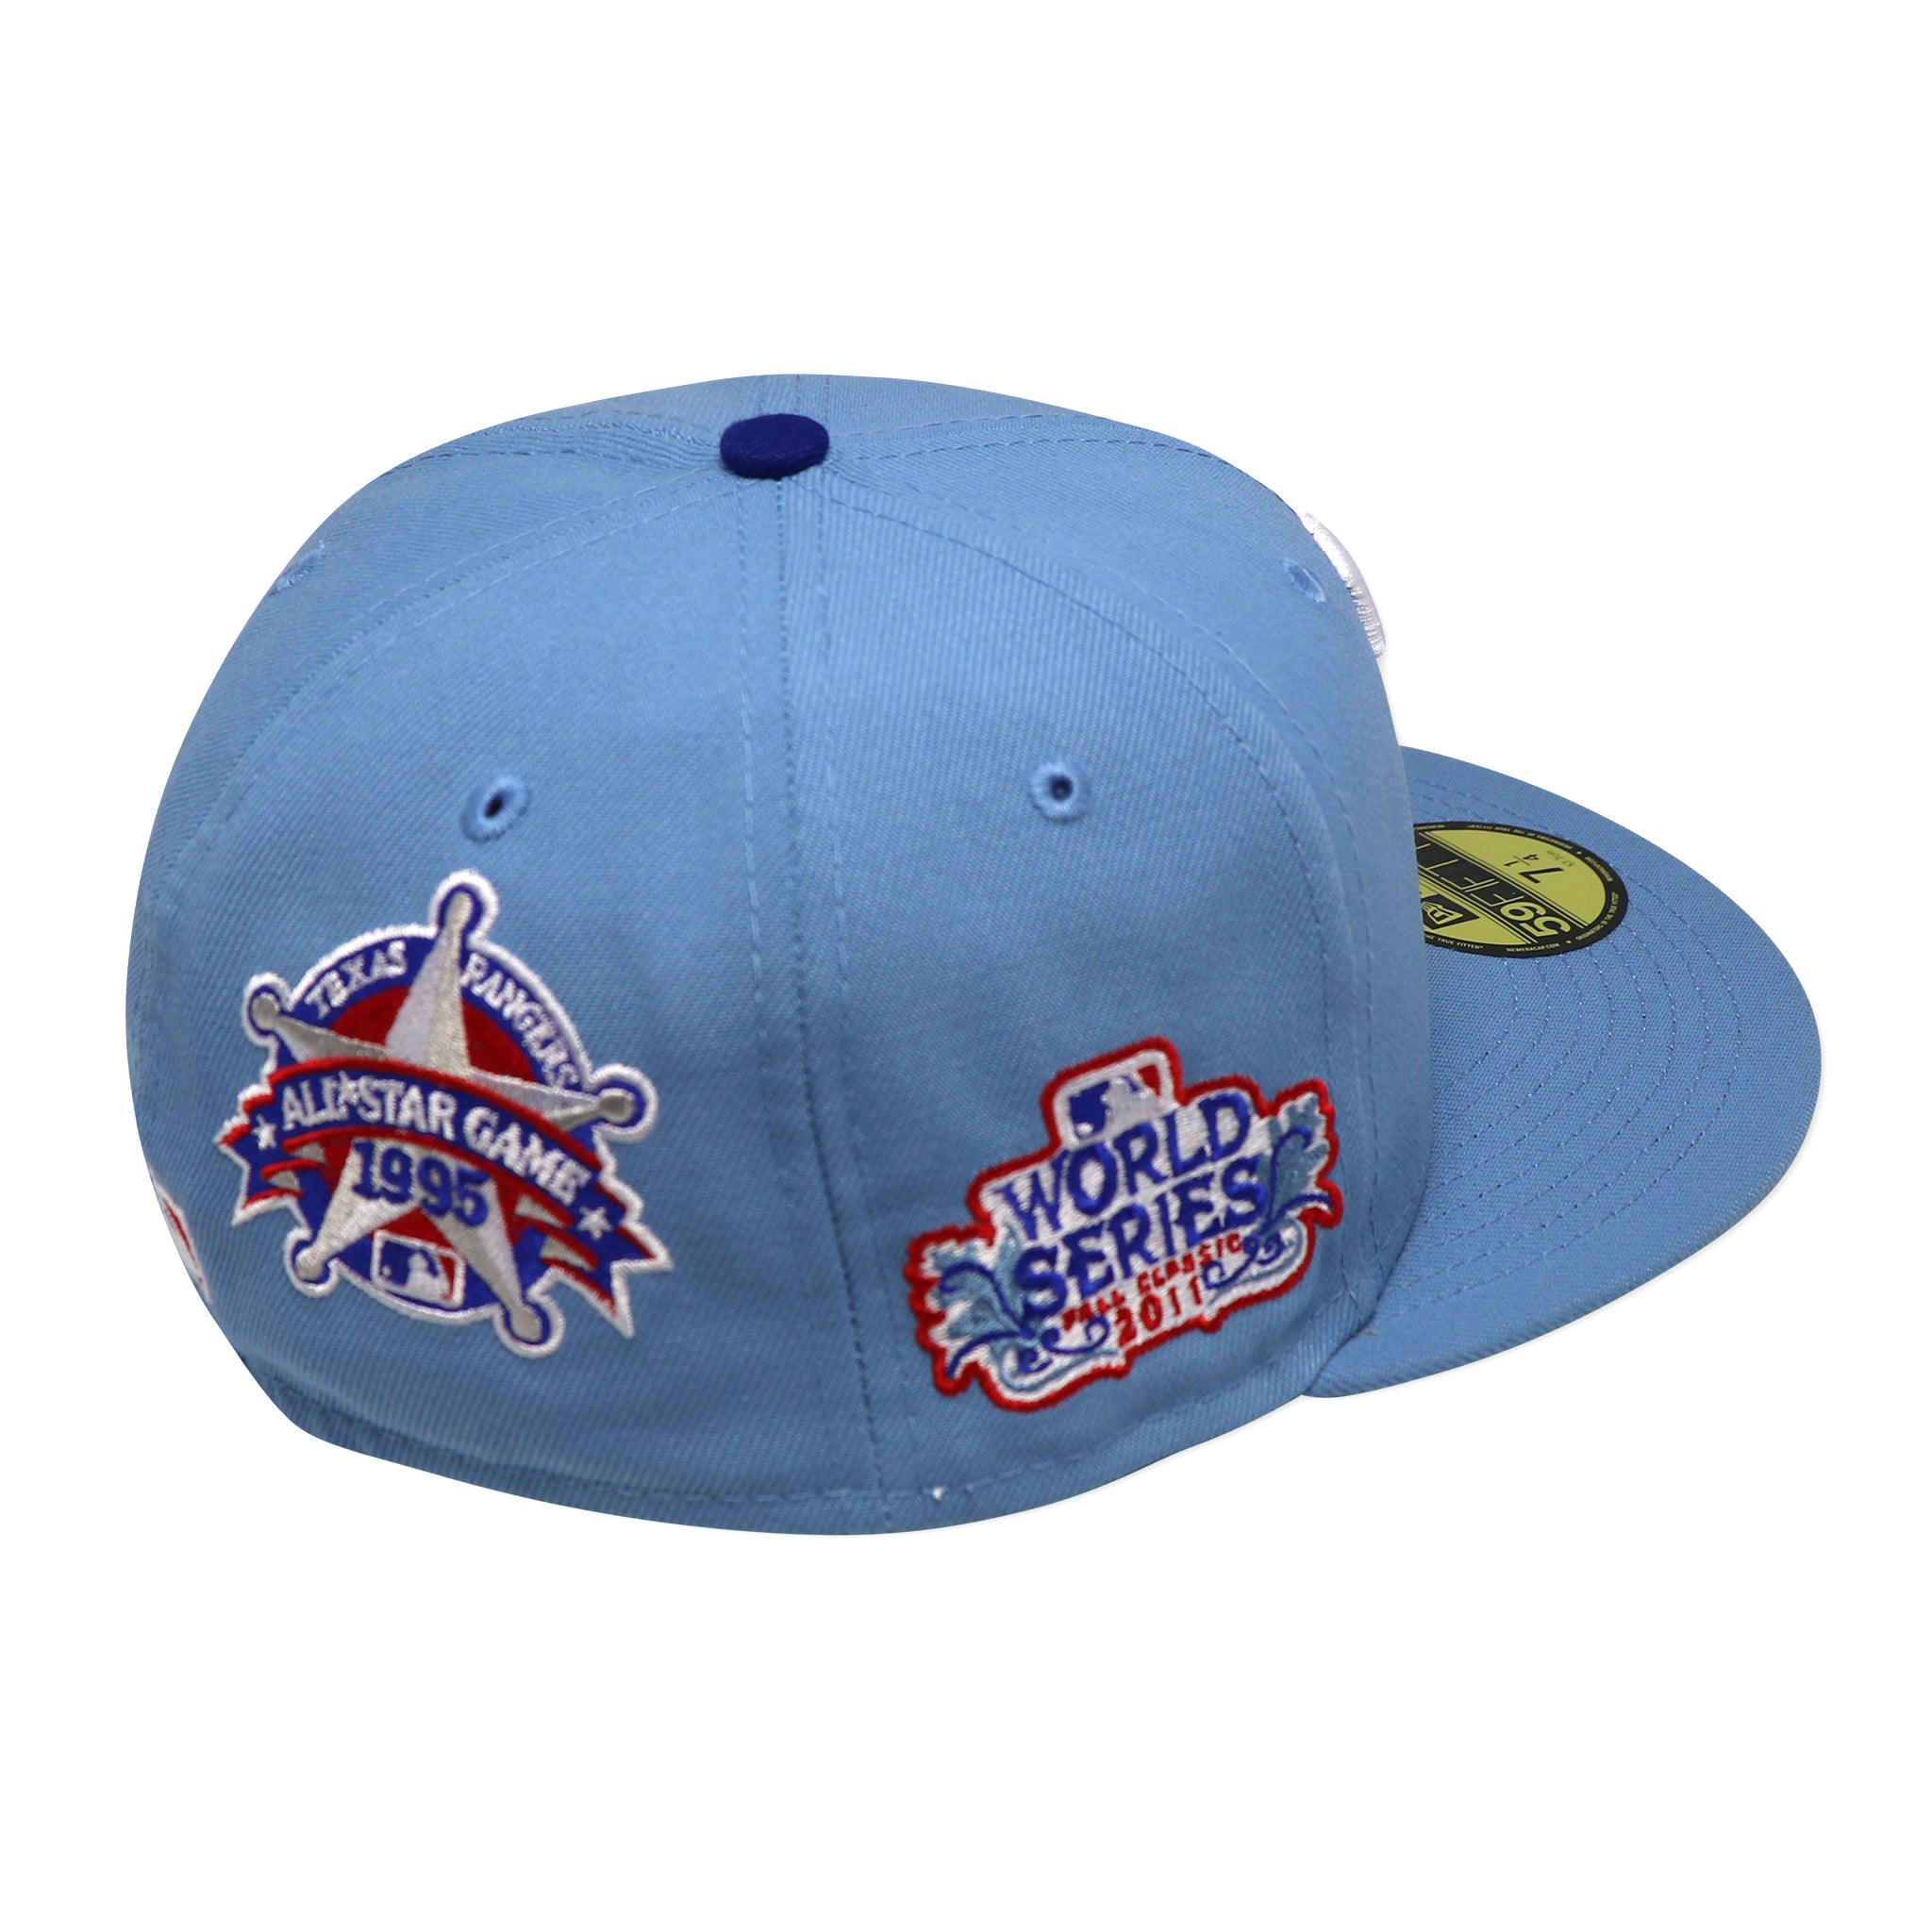 TEXAS RANGERS "2011 WS X 1995 ASG" NEW ERA 59FIFTY FITTED (RED UNDER VISOR)